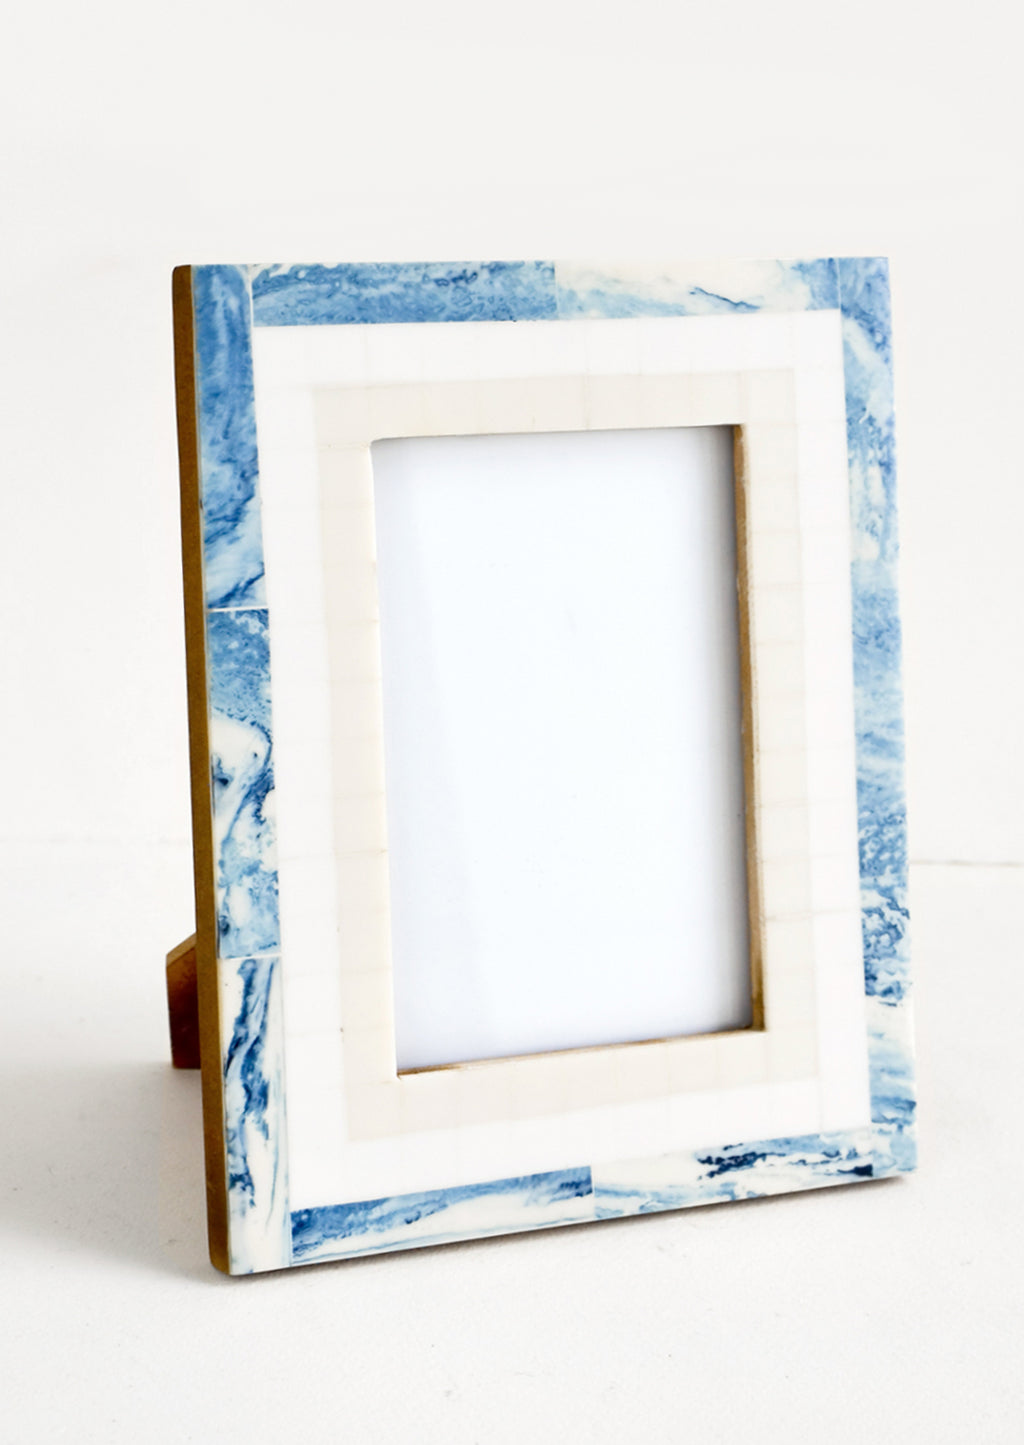 1: A decorative picture frame with a tiled border in marbled blue, white and cream.